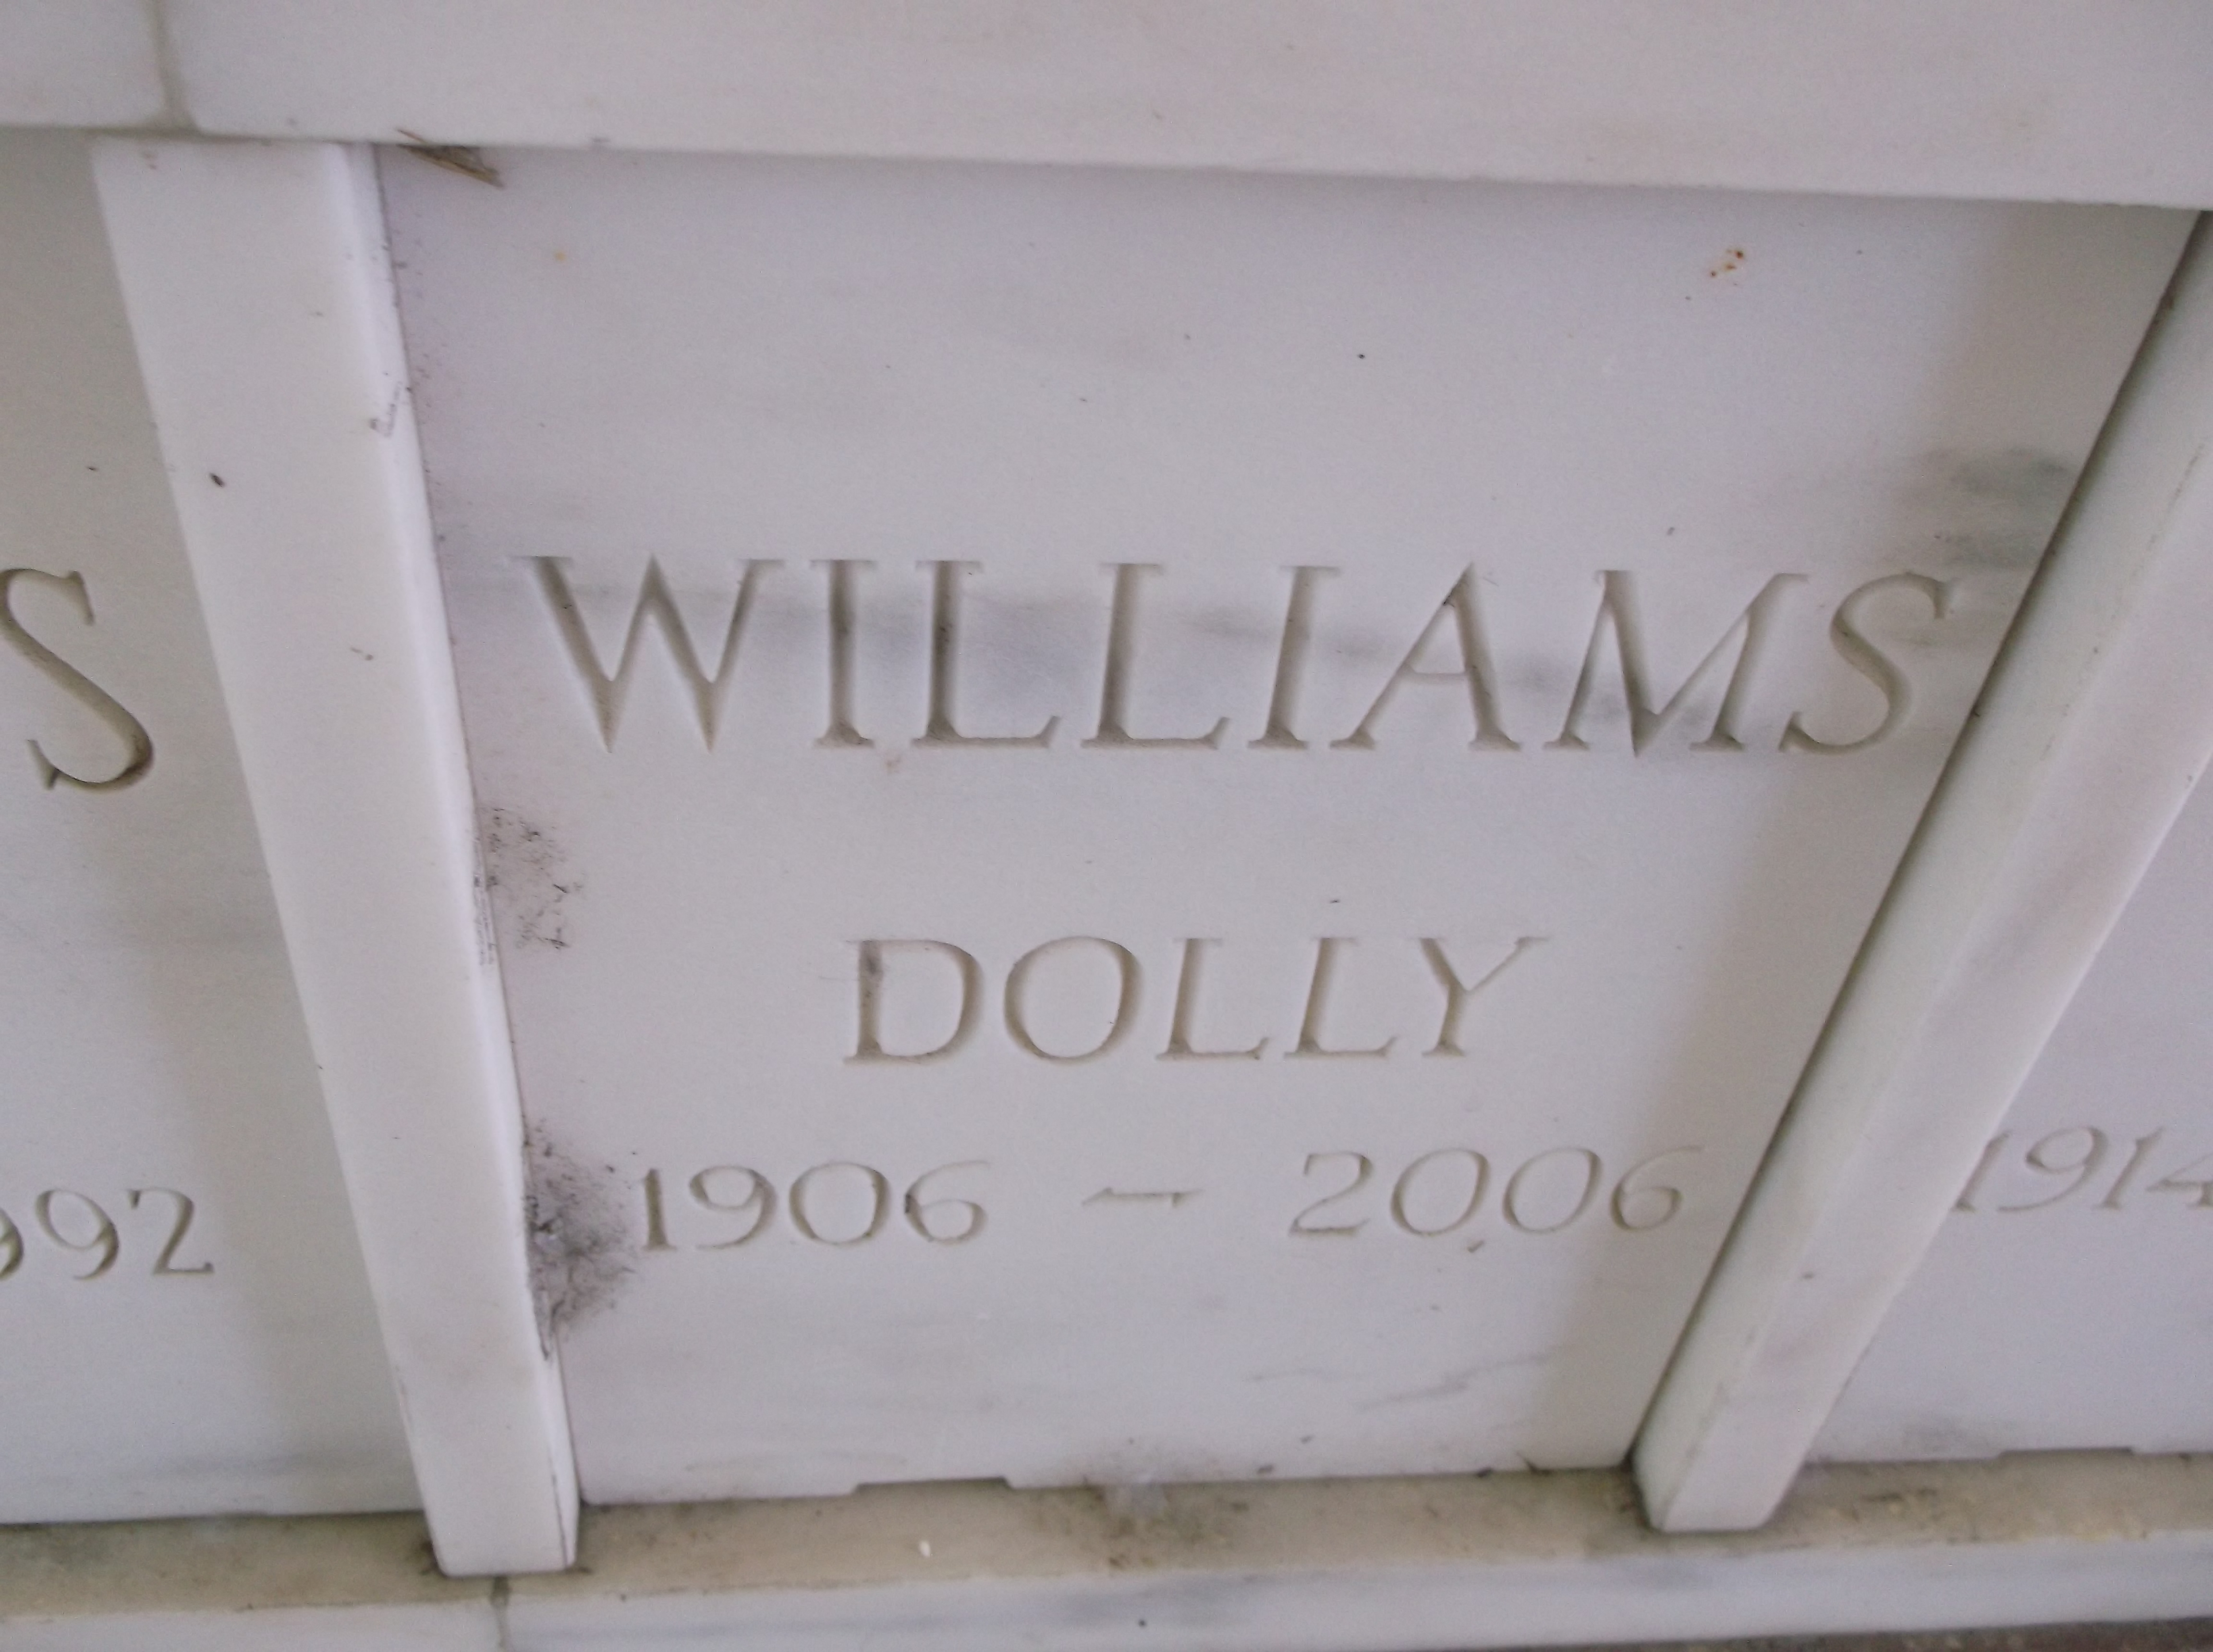 Dolly Williams